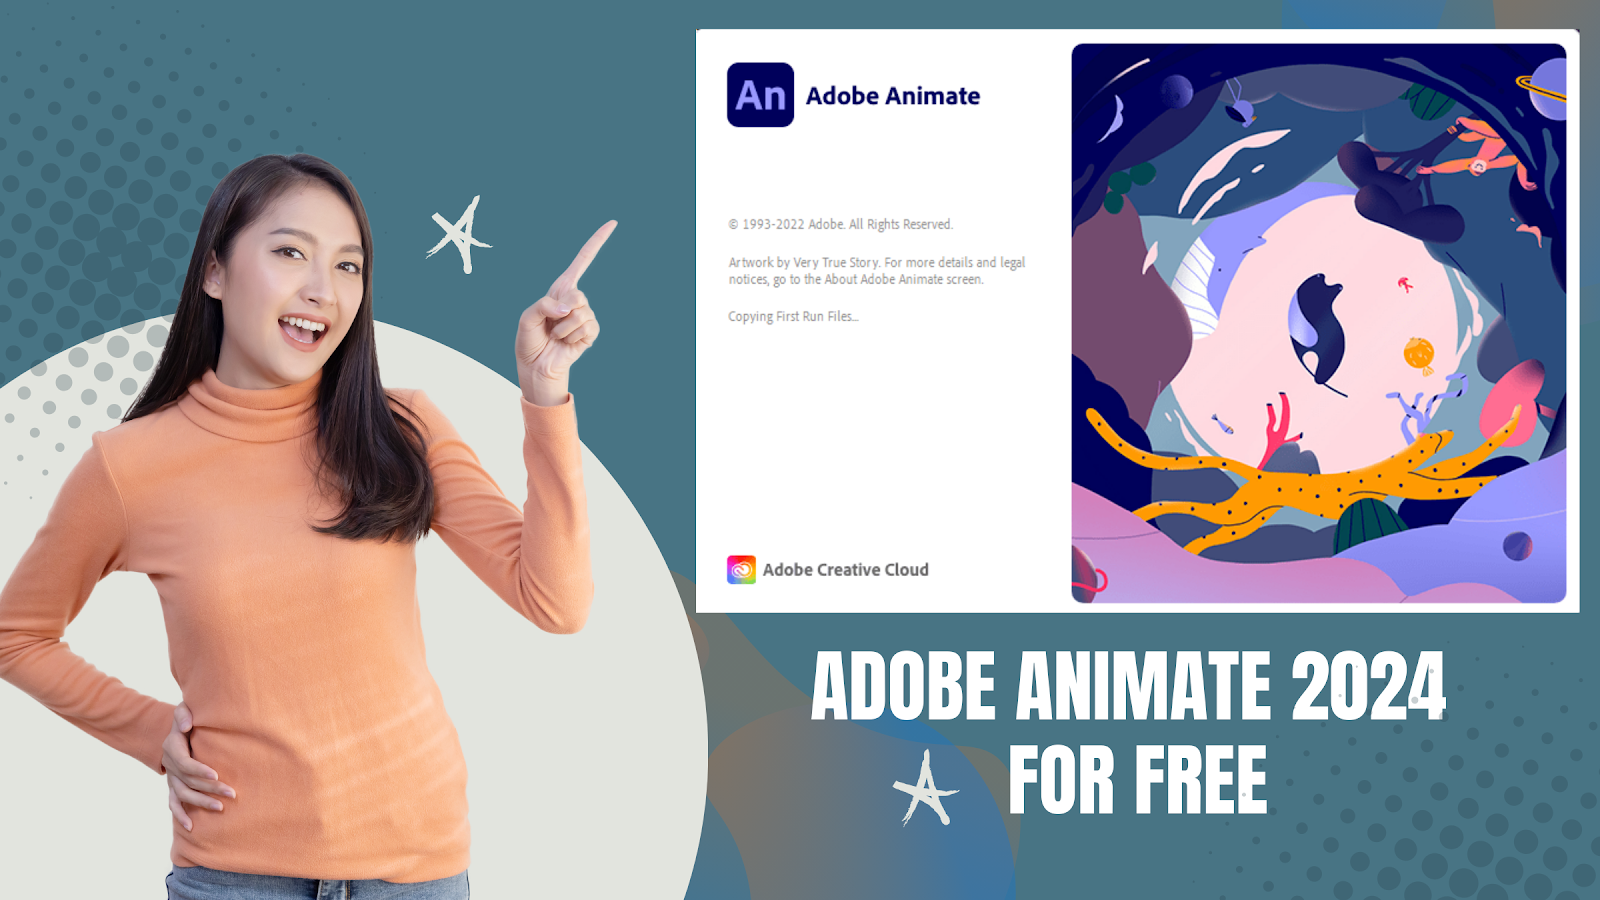 Adobe Animate 2024 for Free